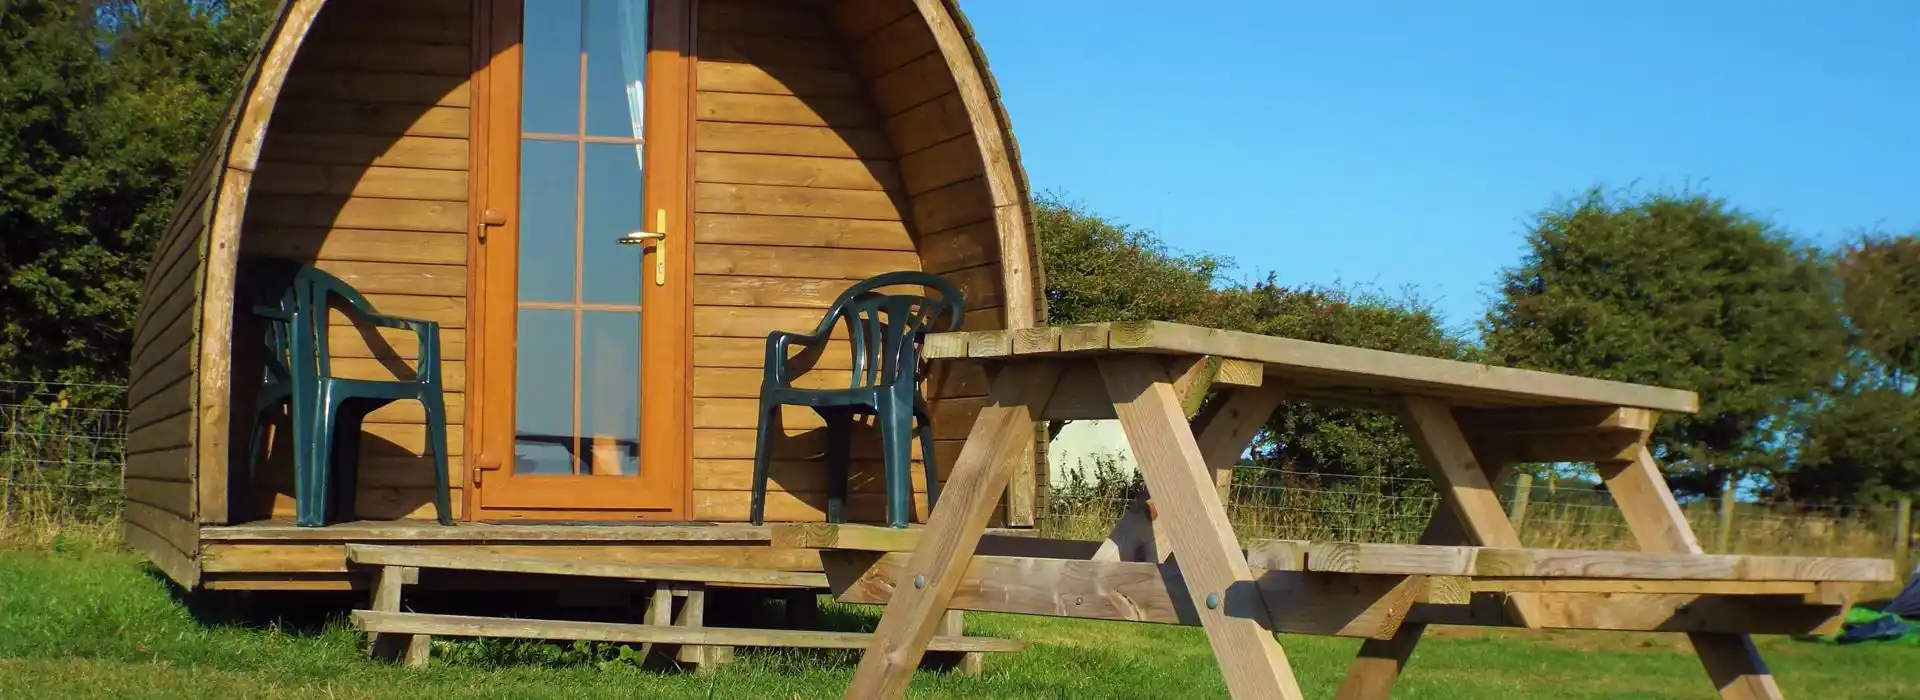 Camping pods in East Yorkshire